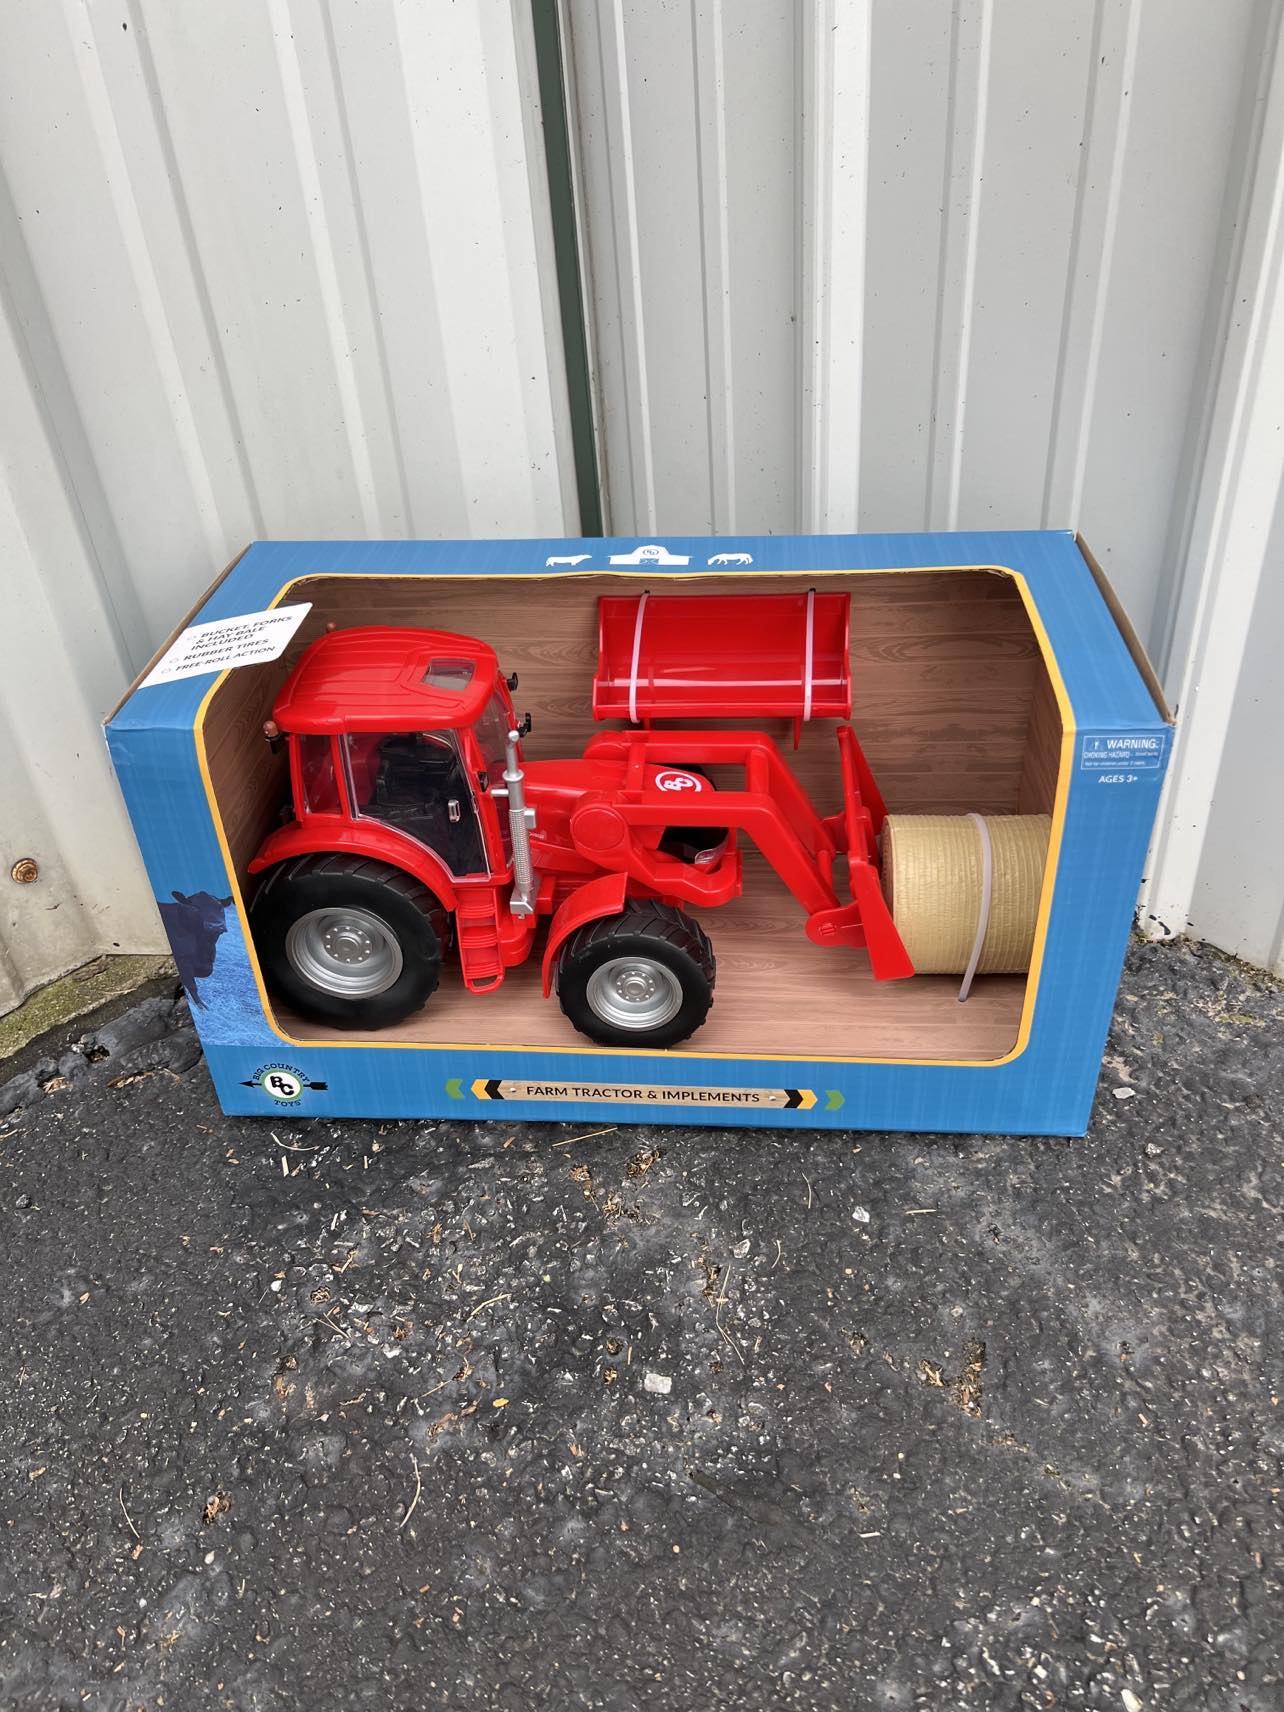 Red Tractor & Implements-Toys-Big Country Toys-Lucky J Boots & More, Women's, Men's, & Kids Western Store Located in Carthage, MO